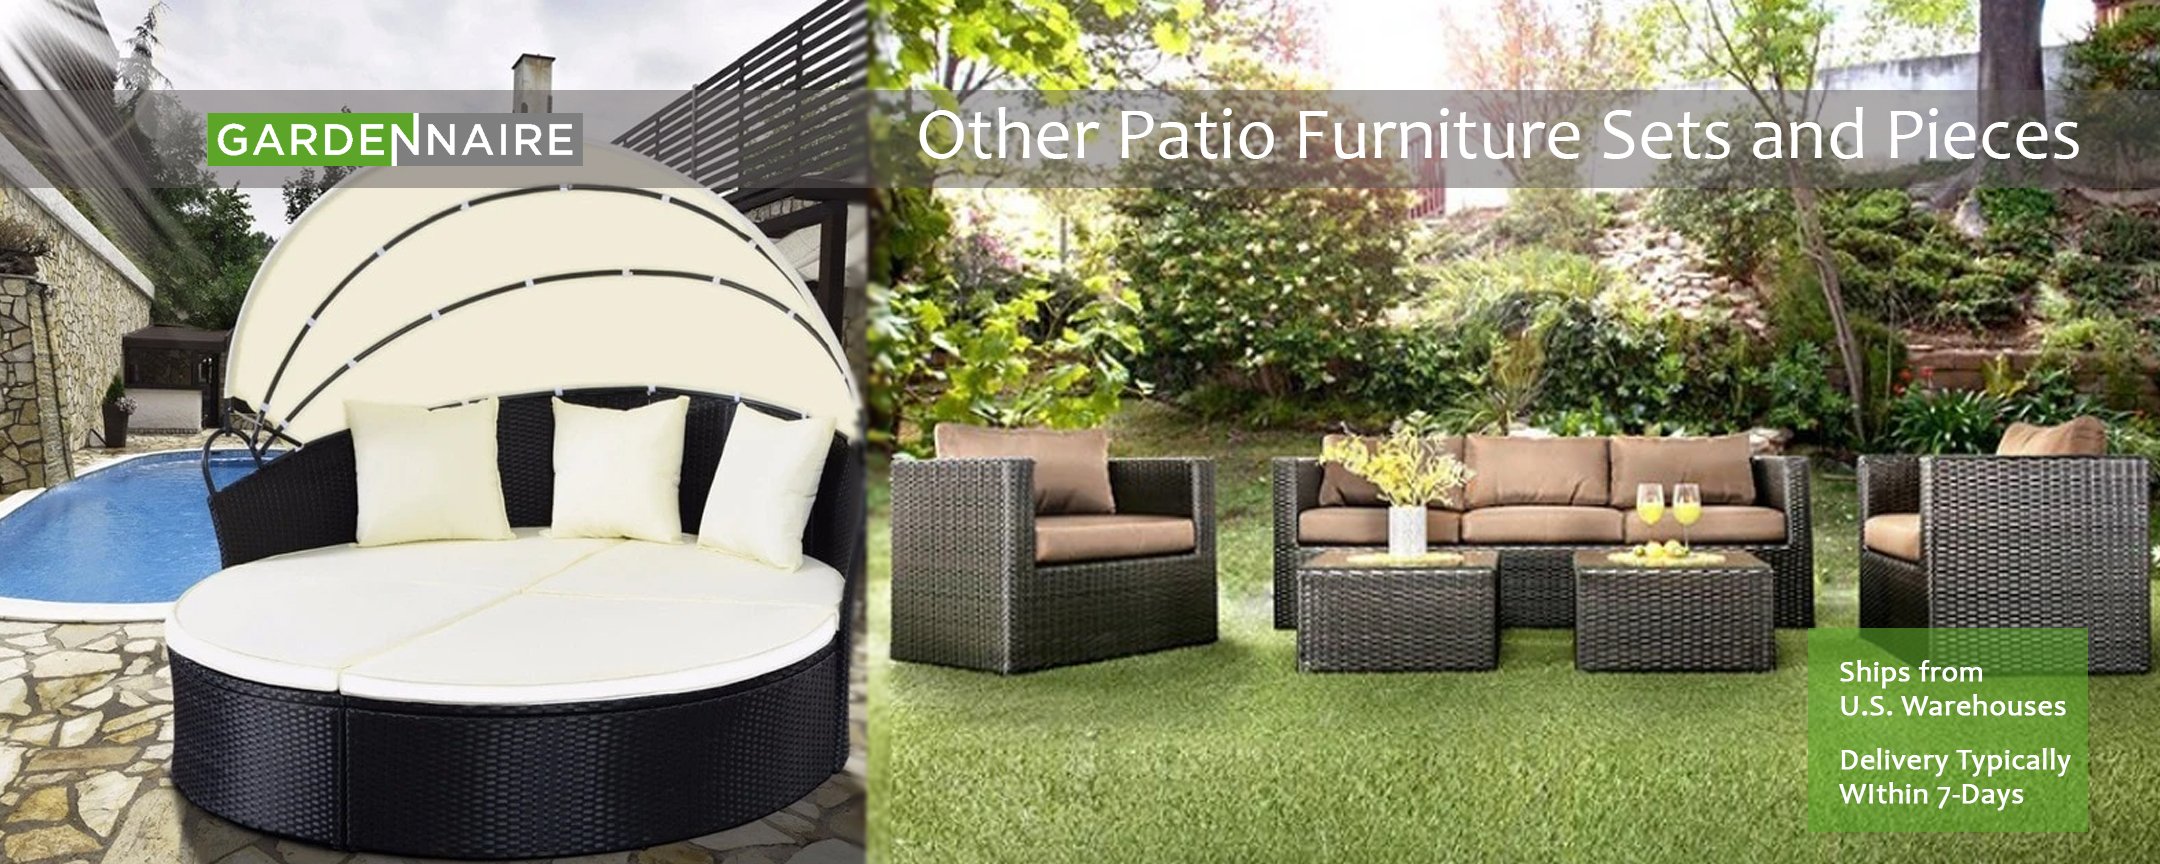 Other Patio Furniture Sets and Pieces